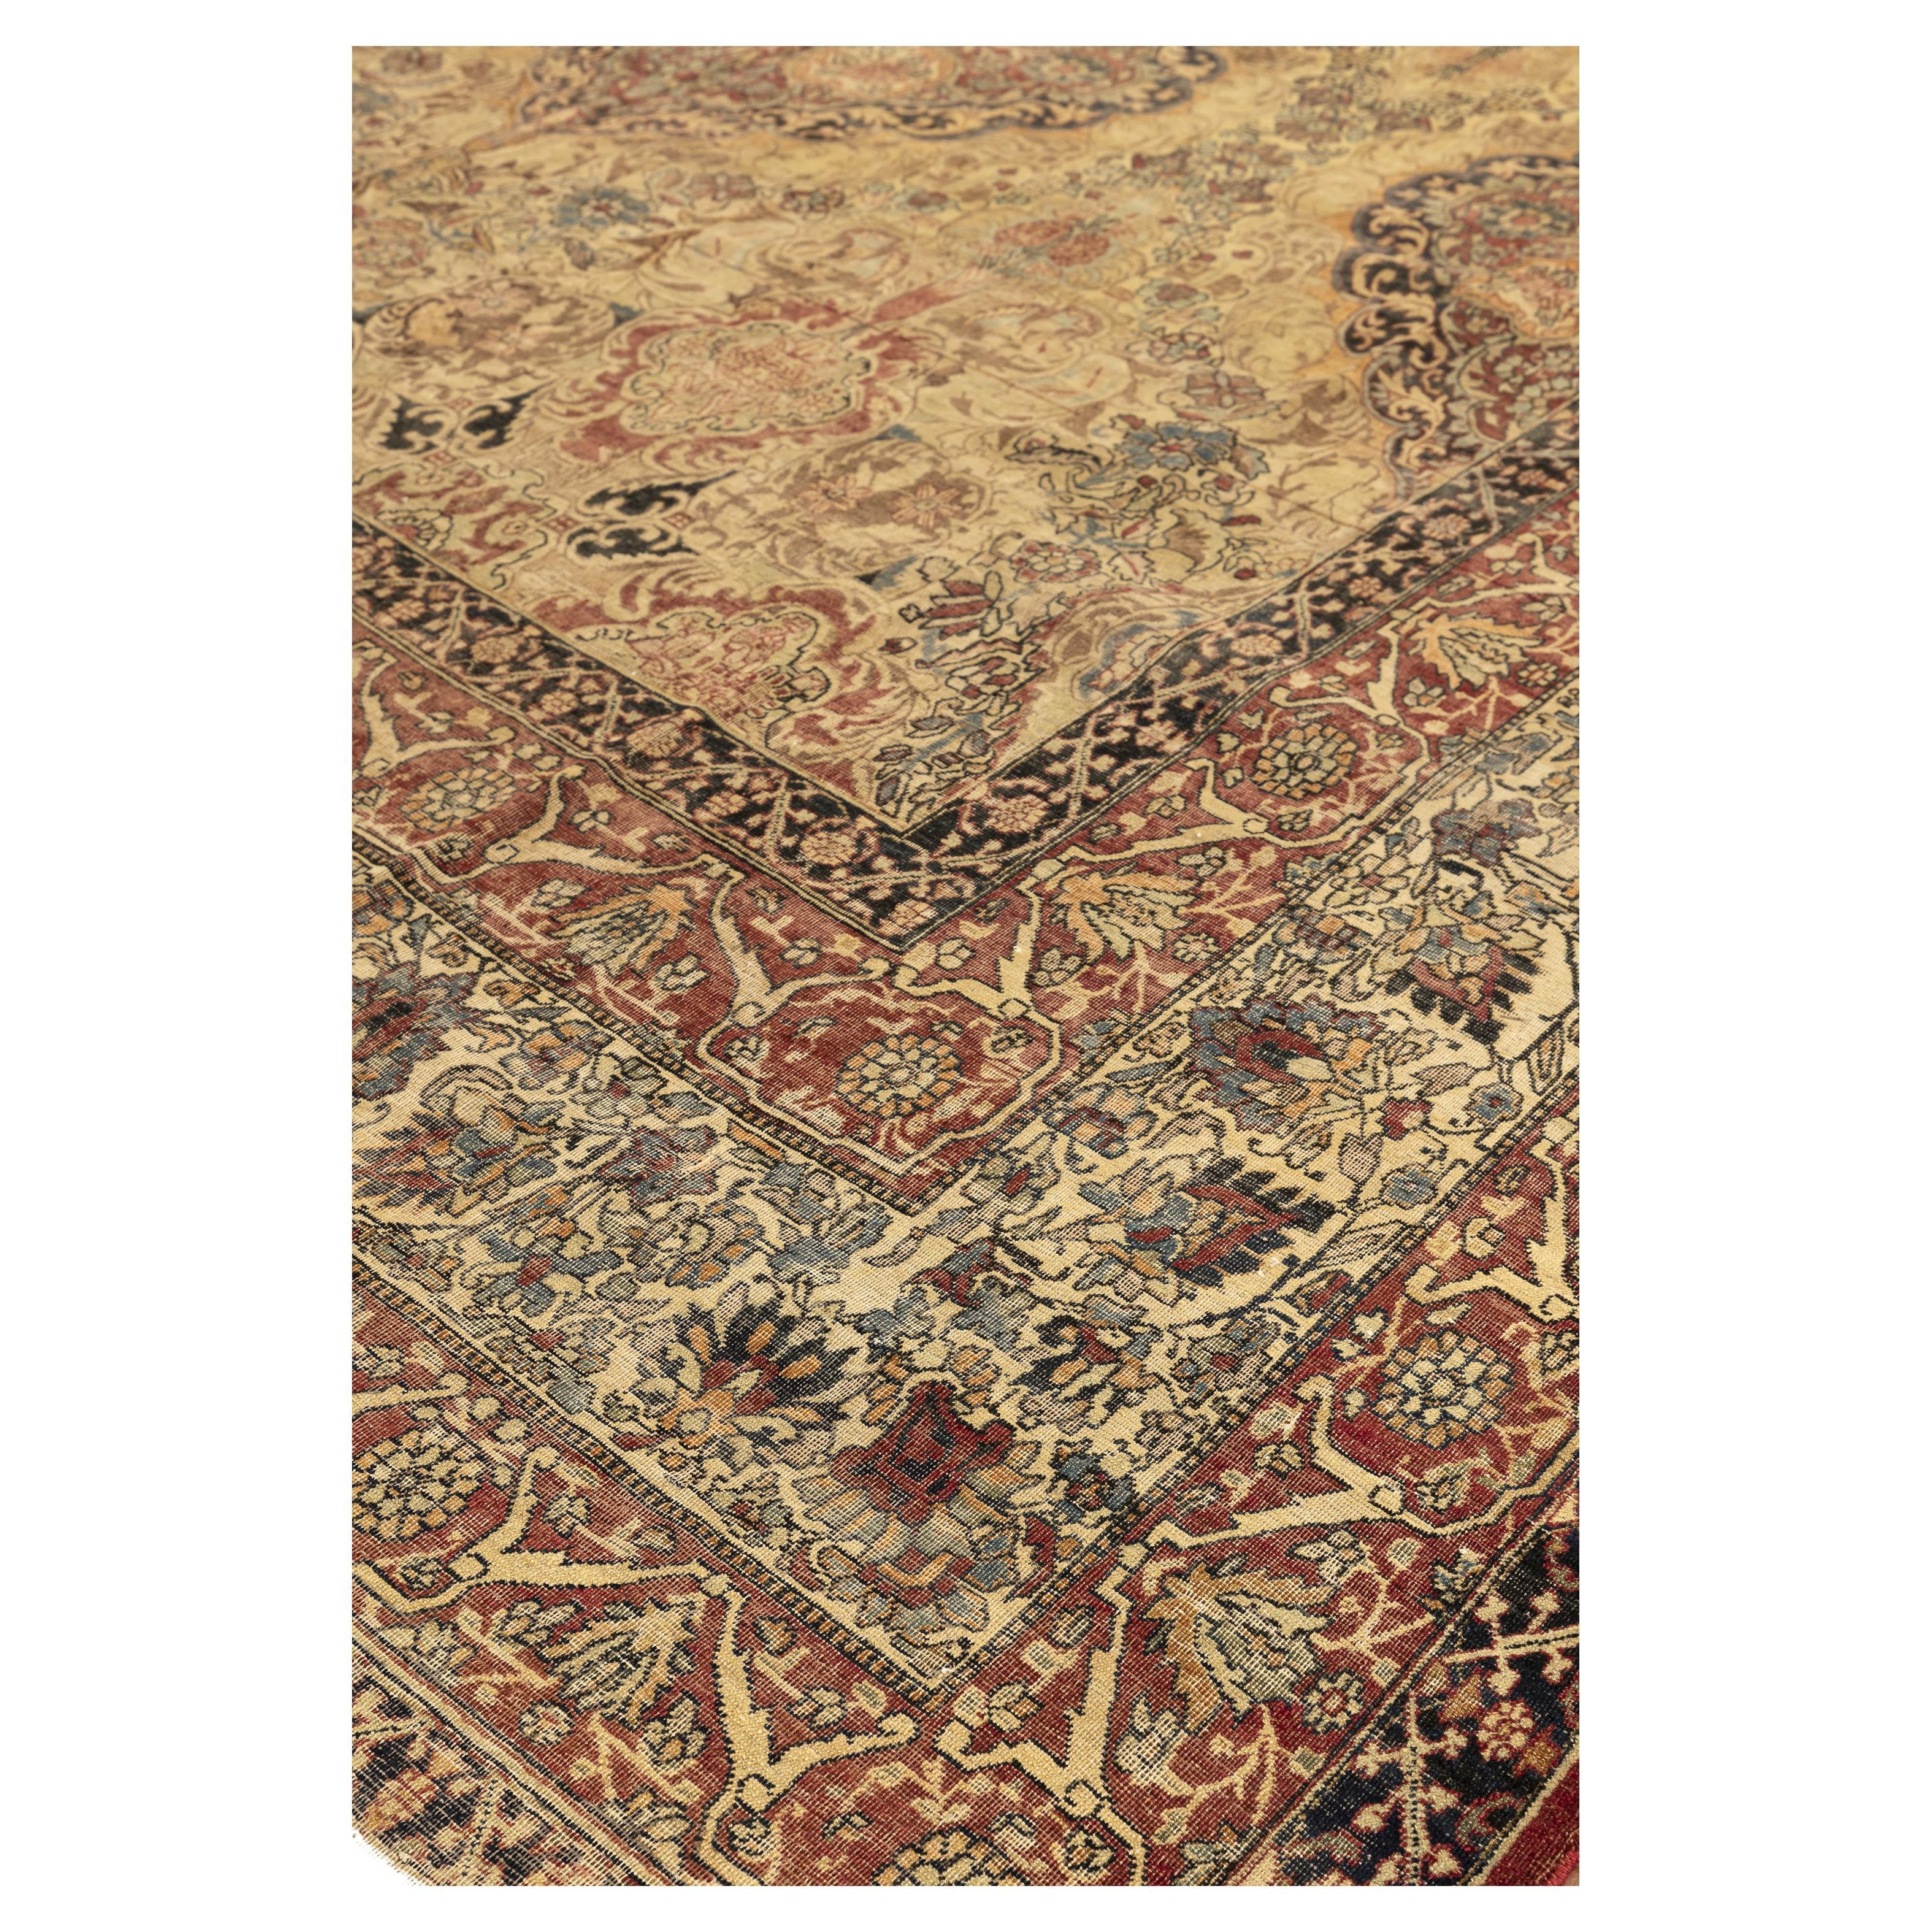 Kerman Lavar – Southern Persia

This magnificent Kerman Lavar features a design that catches the eye for its intricate floral motifs and use of plenty of colours. The carpet has a rich design that resembles a multicoloured garden with palm leaves